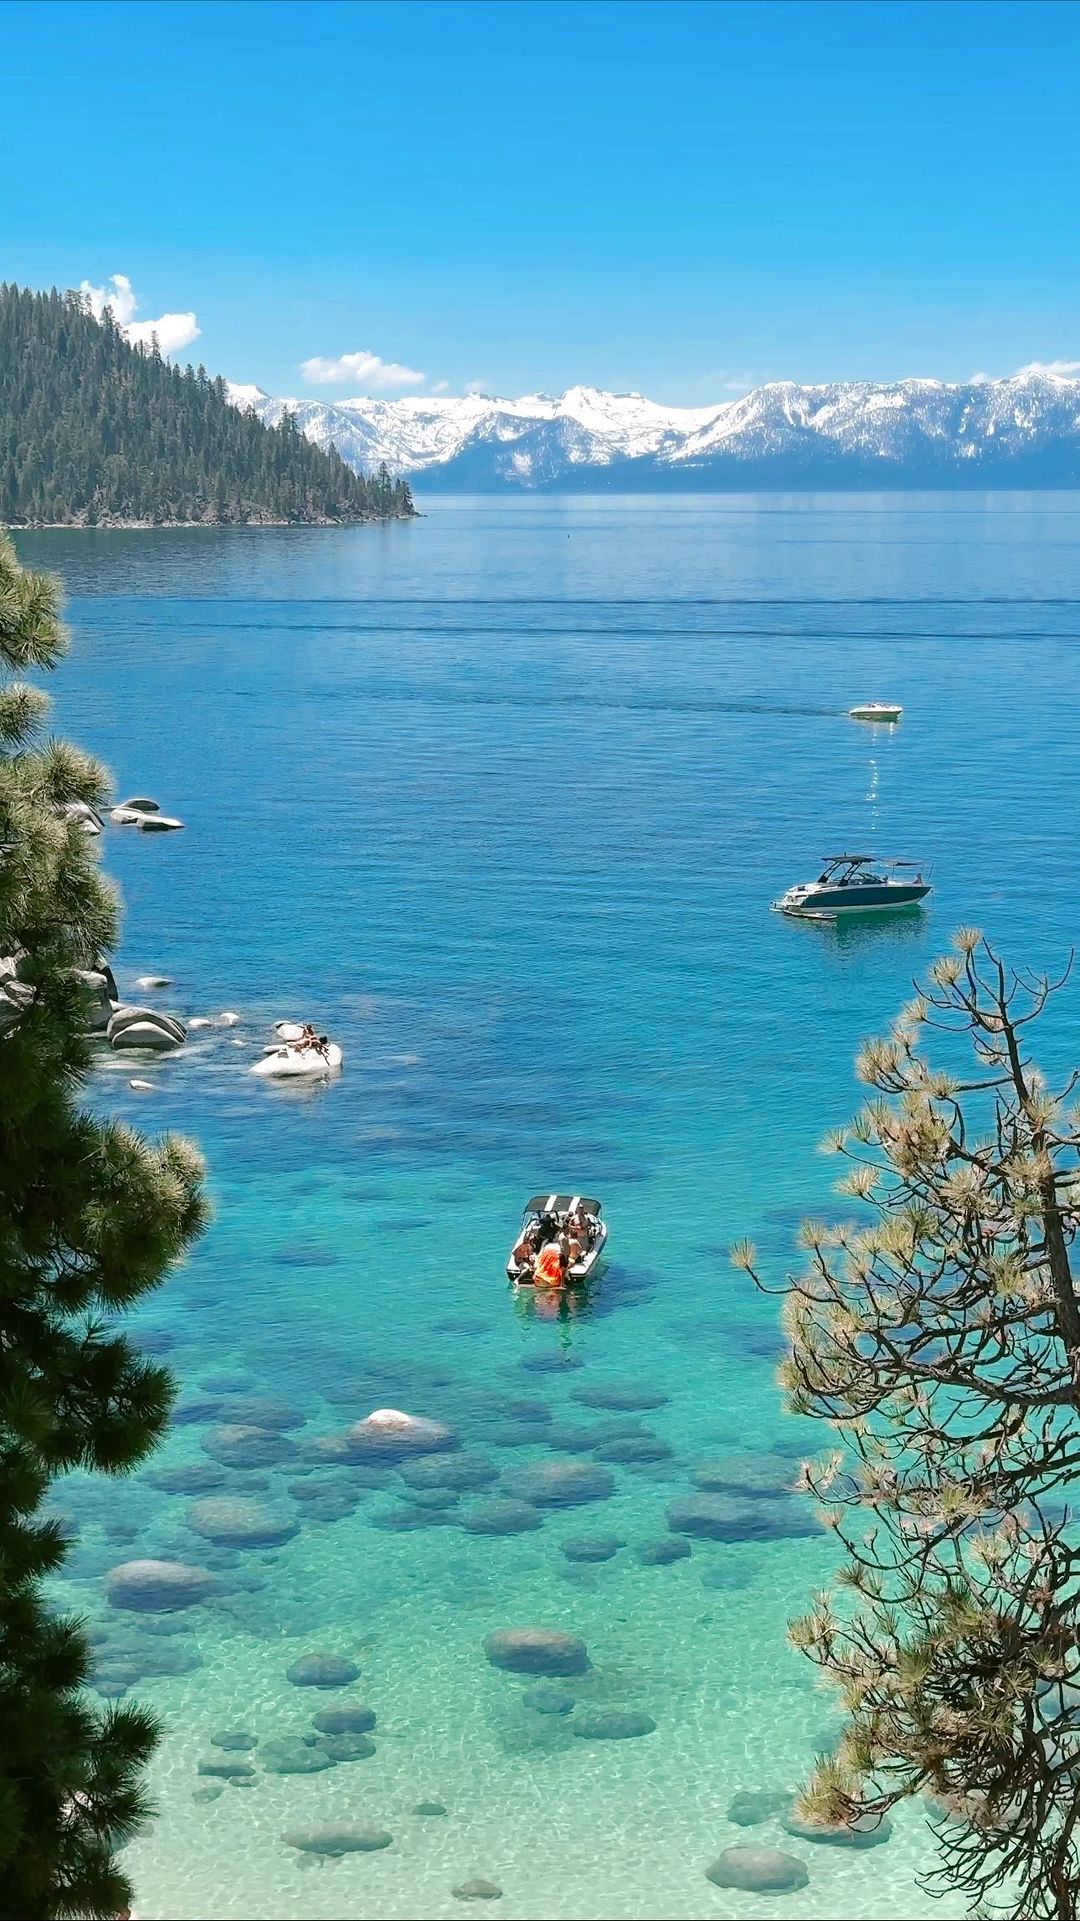 4-day trip to Tahoe City